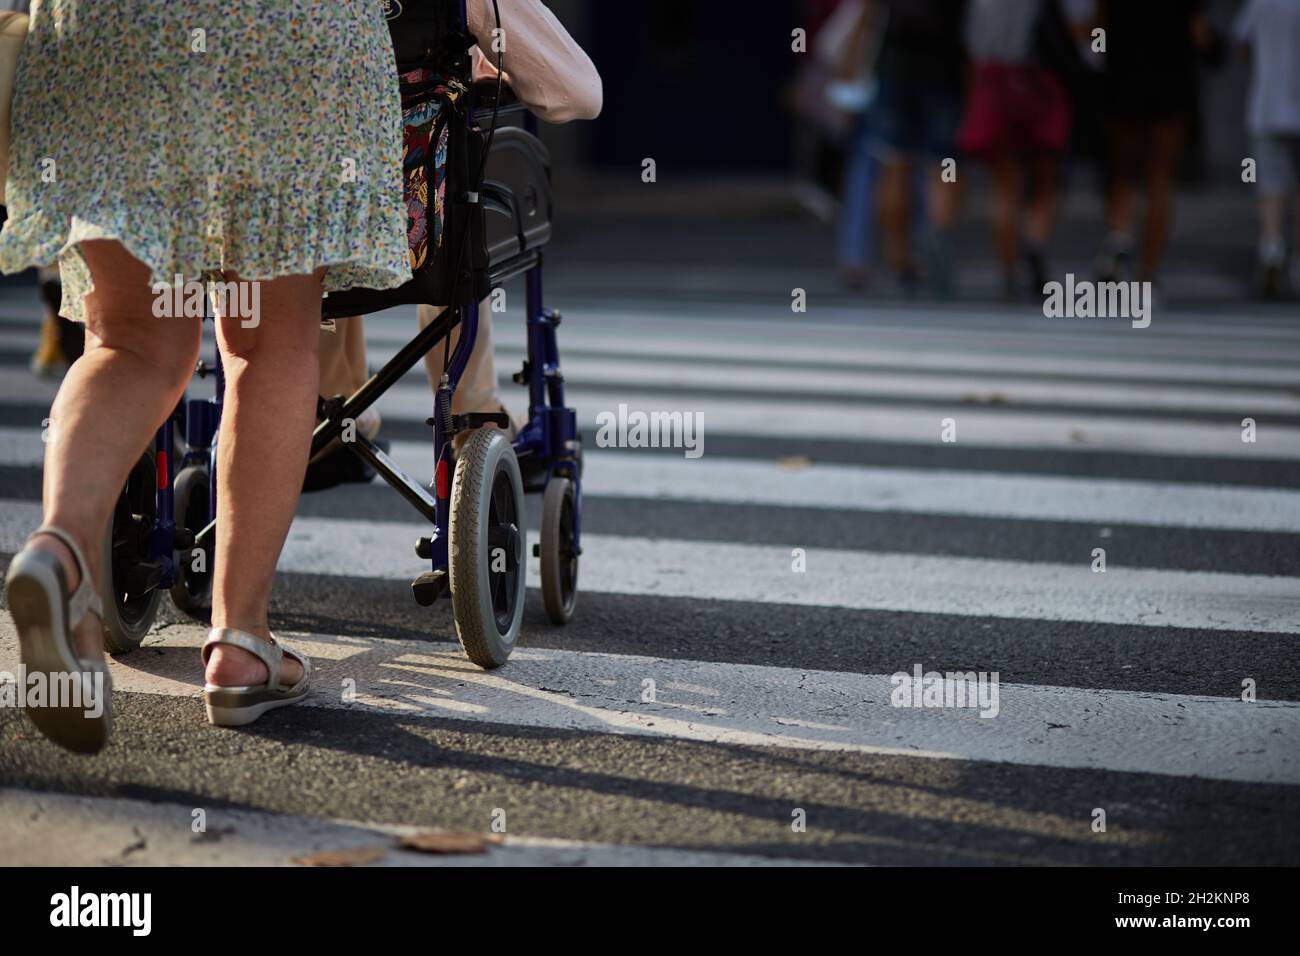 Woman helping crossing the street a person in a wheel chair. Stock Photo